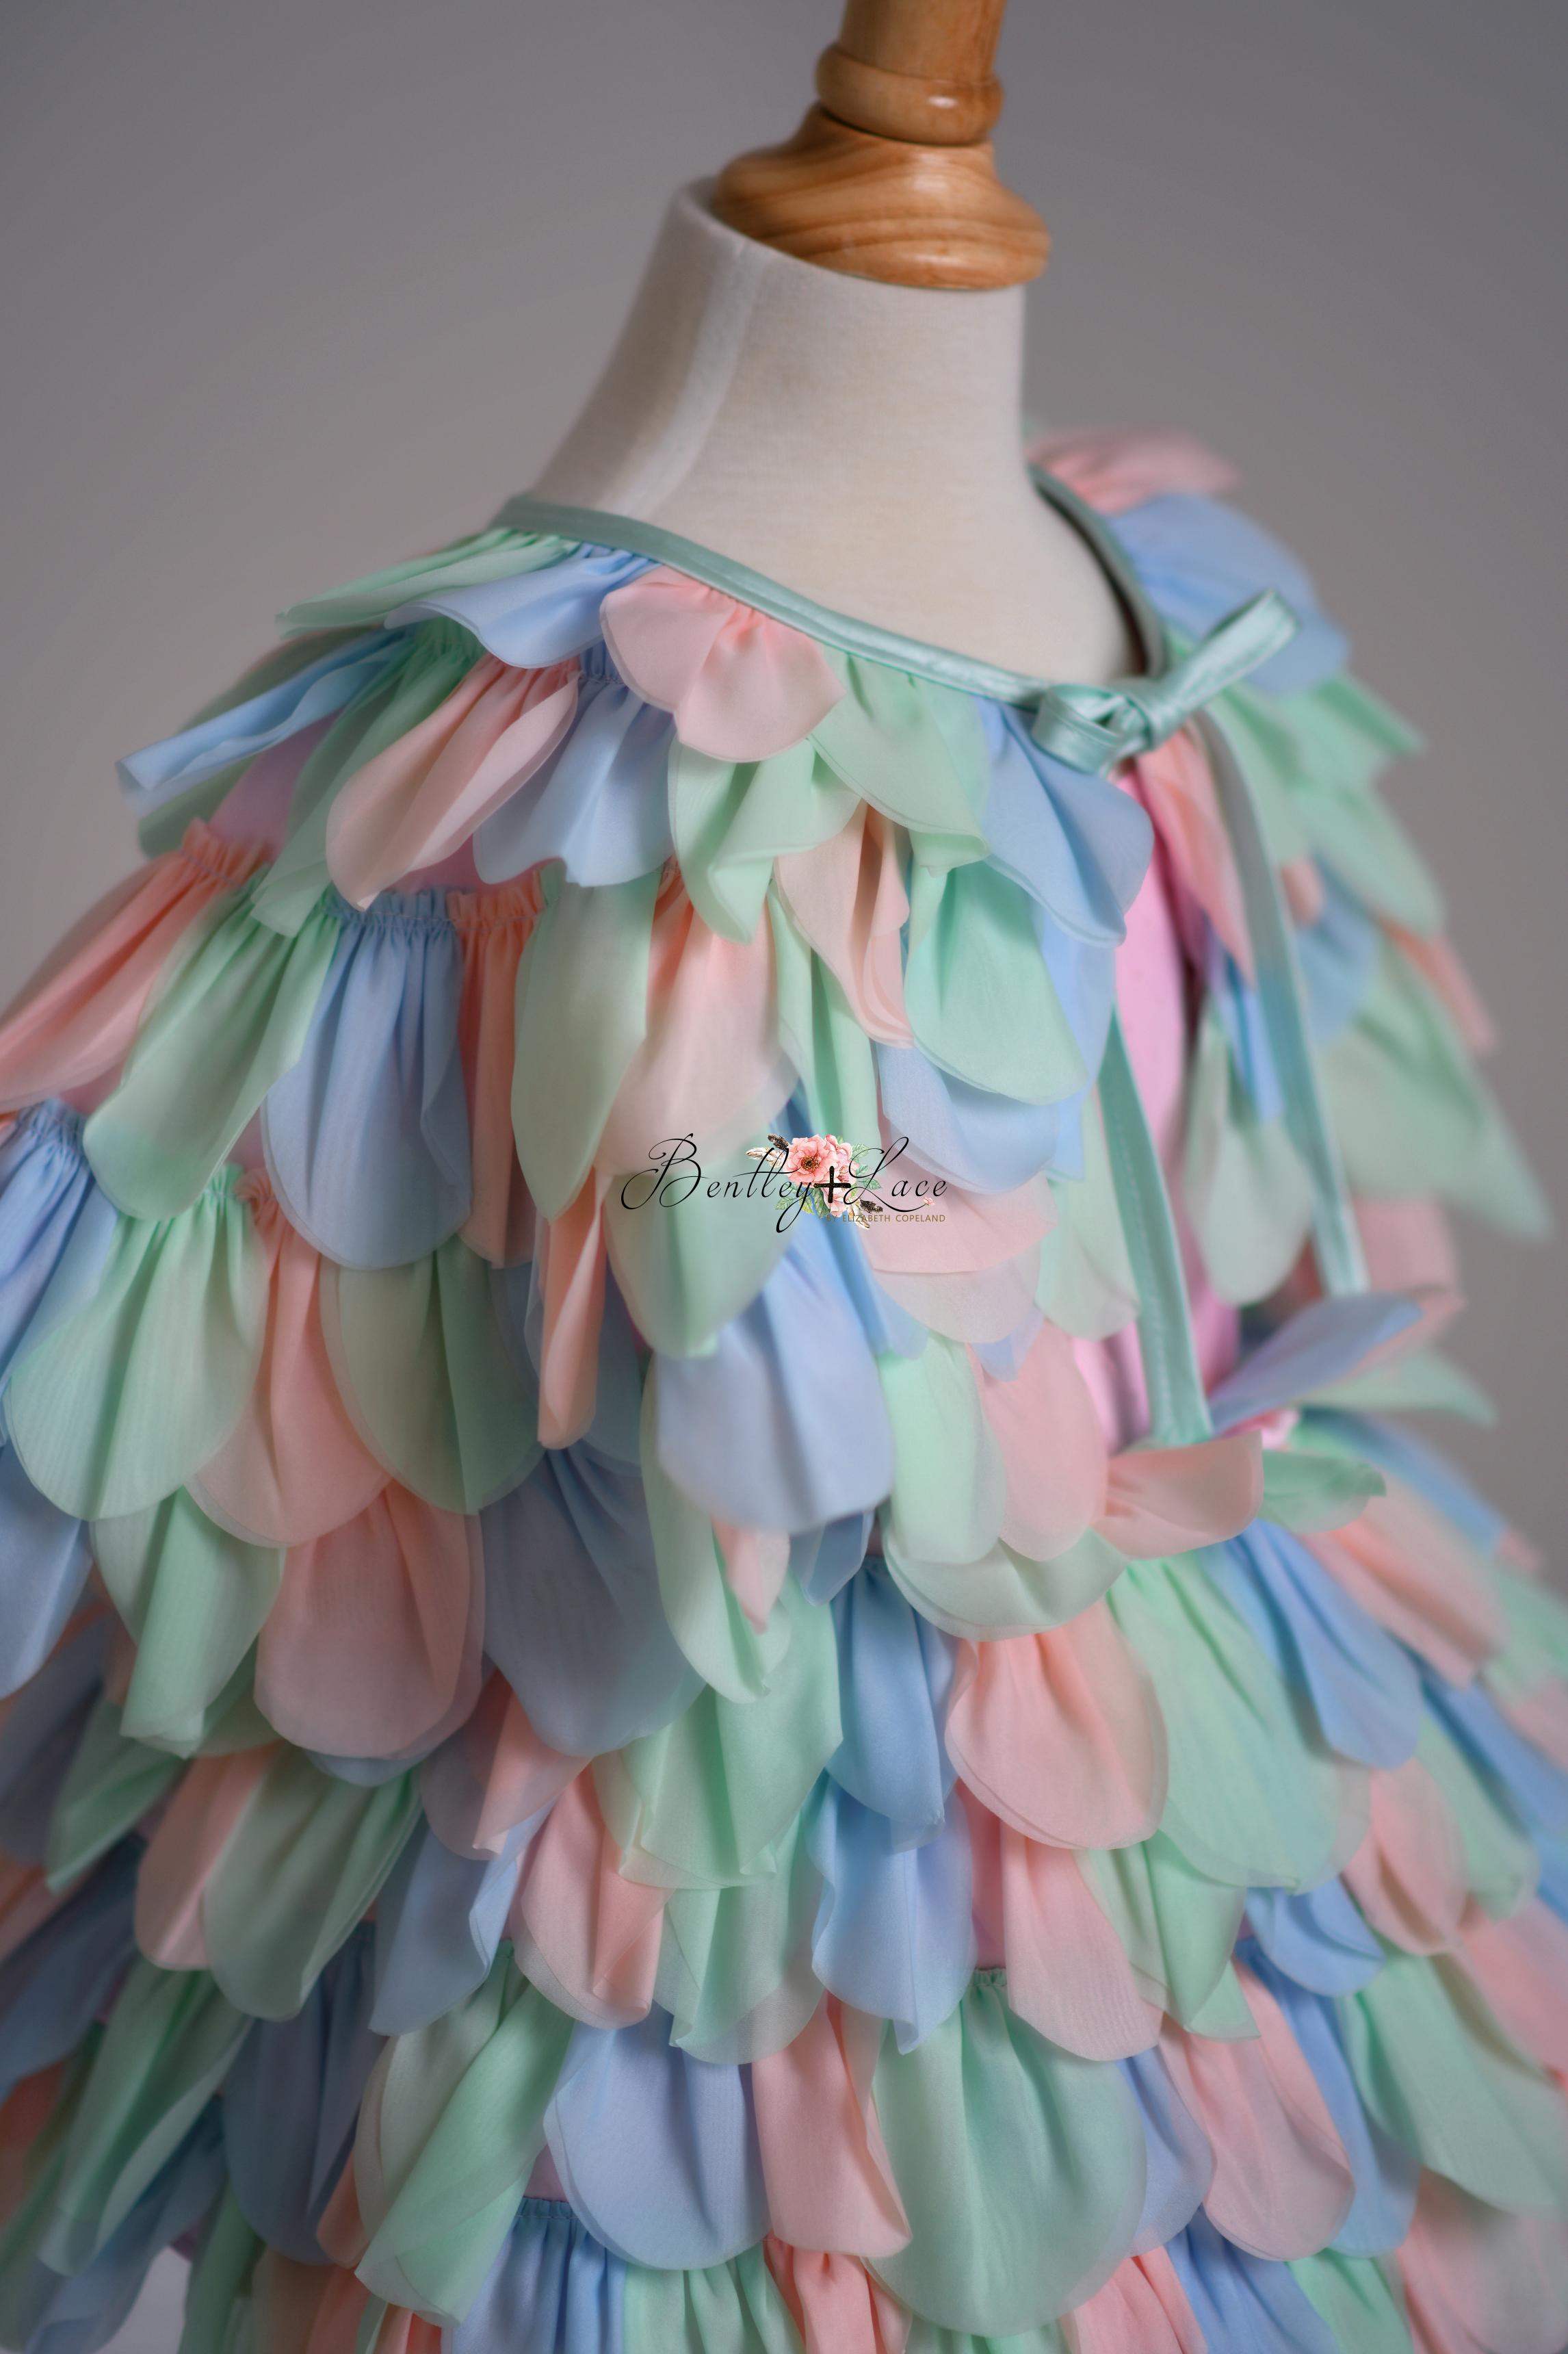 LIMITED EDITION COUTURE GOWN "PETAL WHISPERS" PASTEL - PETAL LENGTH DRESS + CAPE  Editorial Dress, Couture Gown, Special Occasion Dress